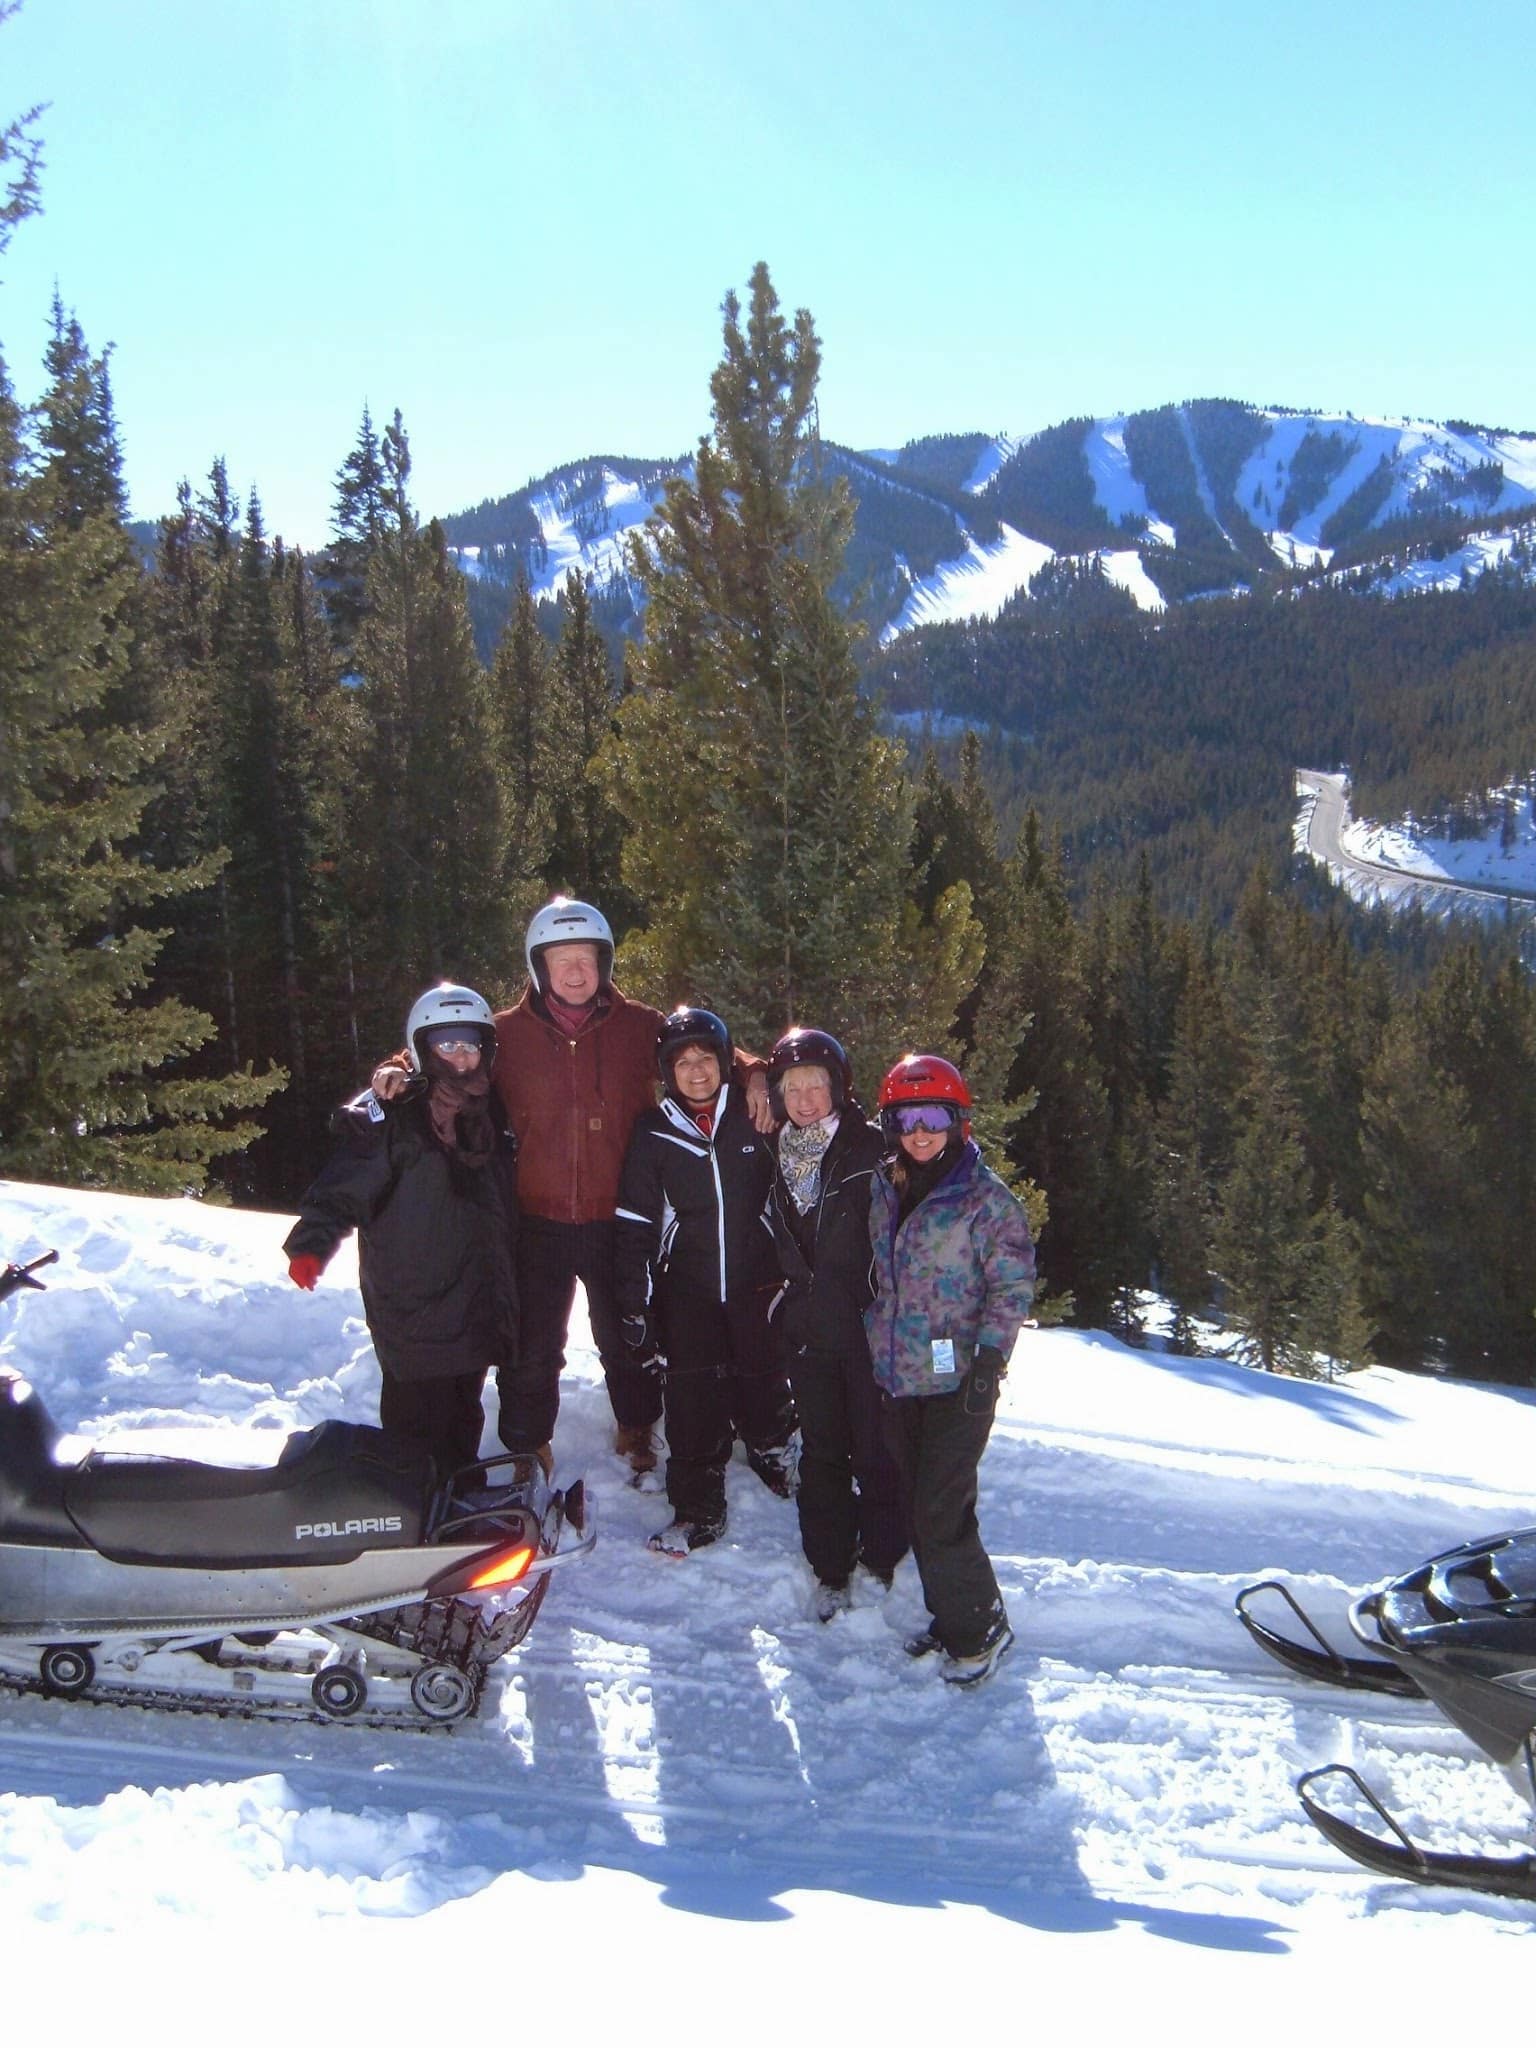 Five people taking a picture near their snowmobiles.